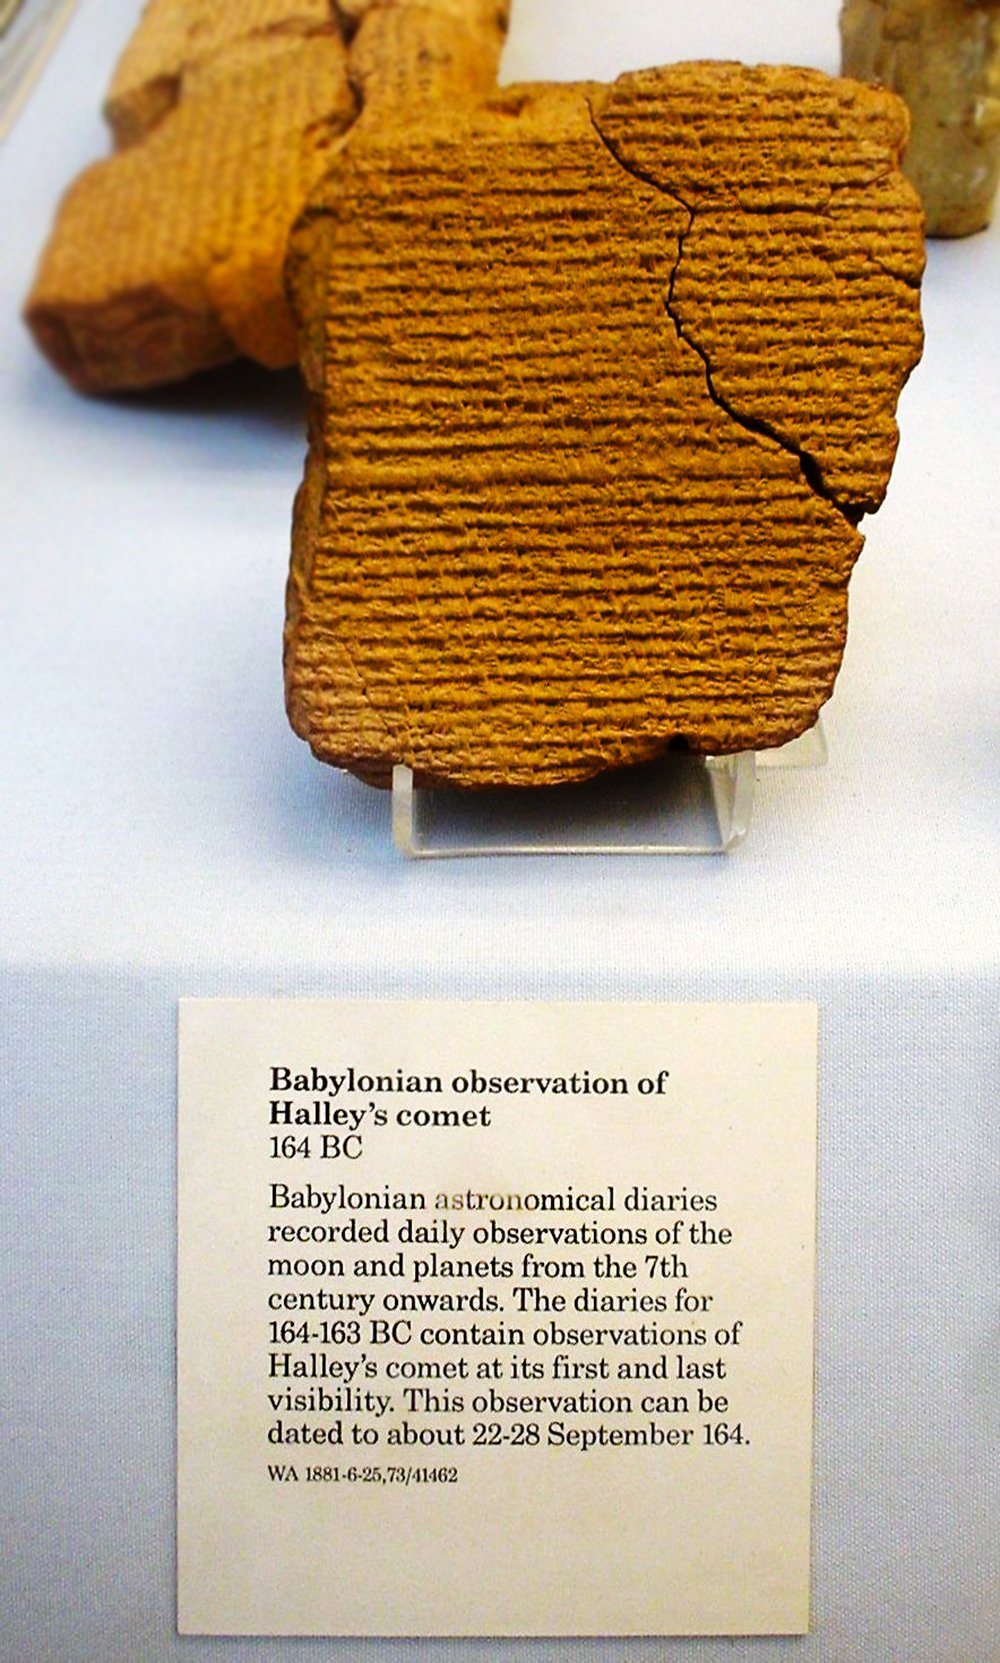 Babylonian tablet from 164 BC, inscribed with symbols and text, documenting the appearance of Halley's comet.